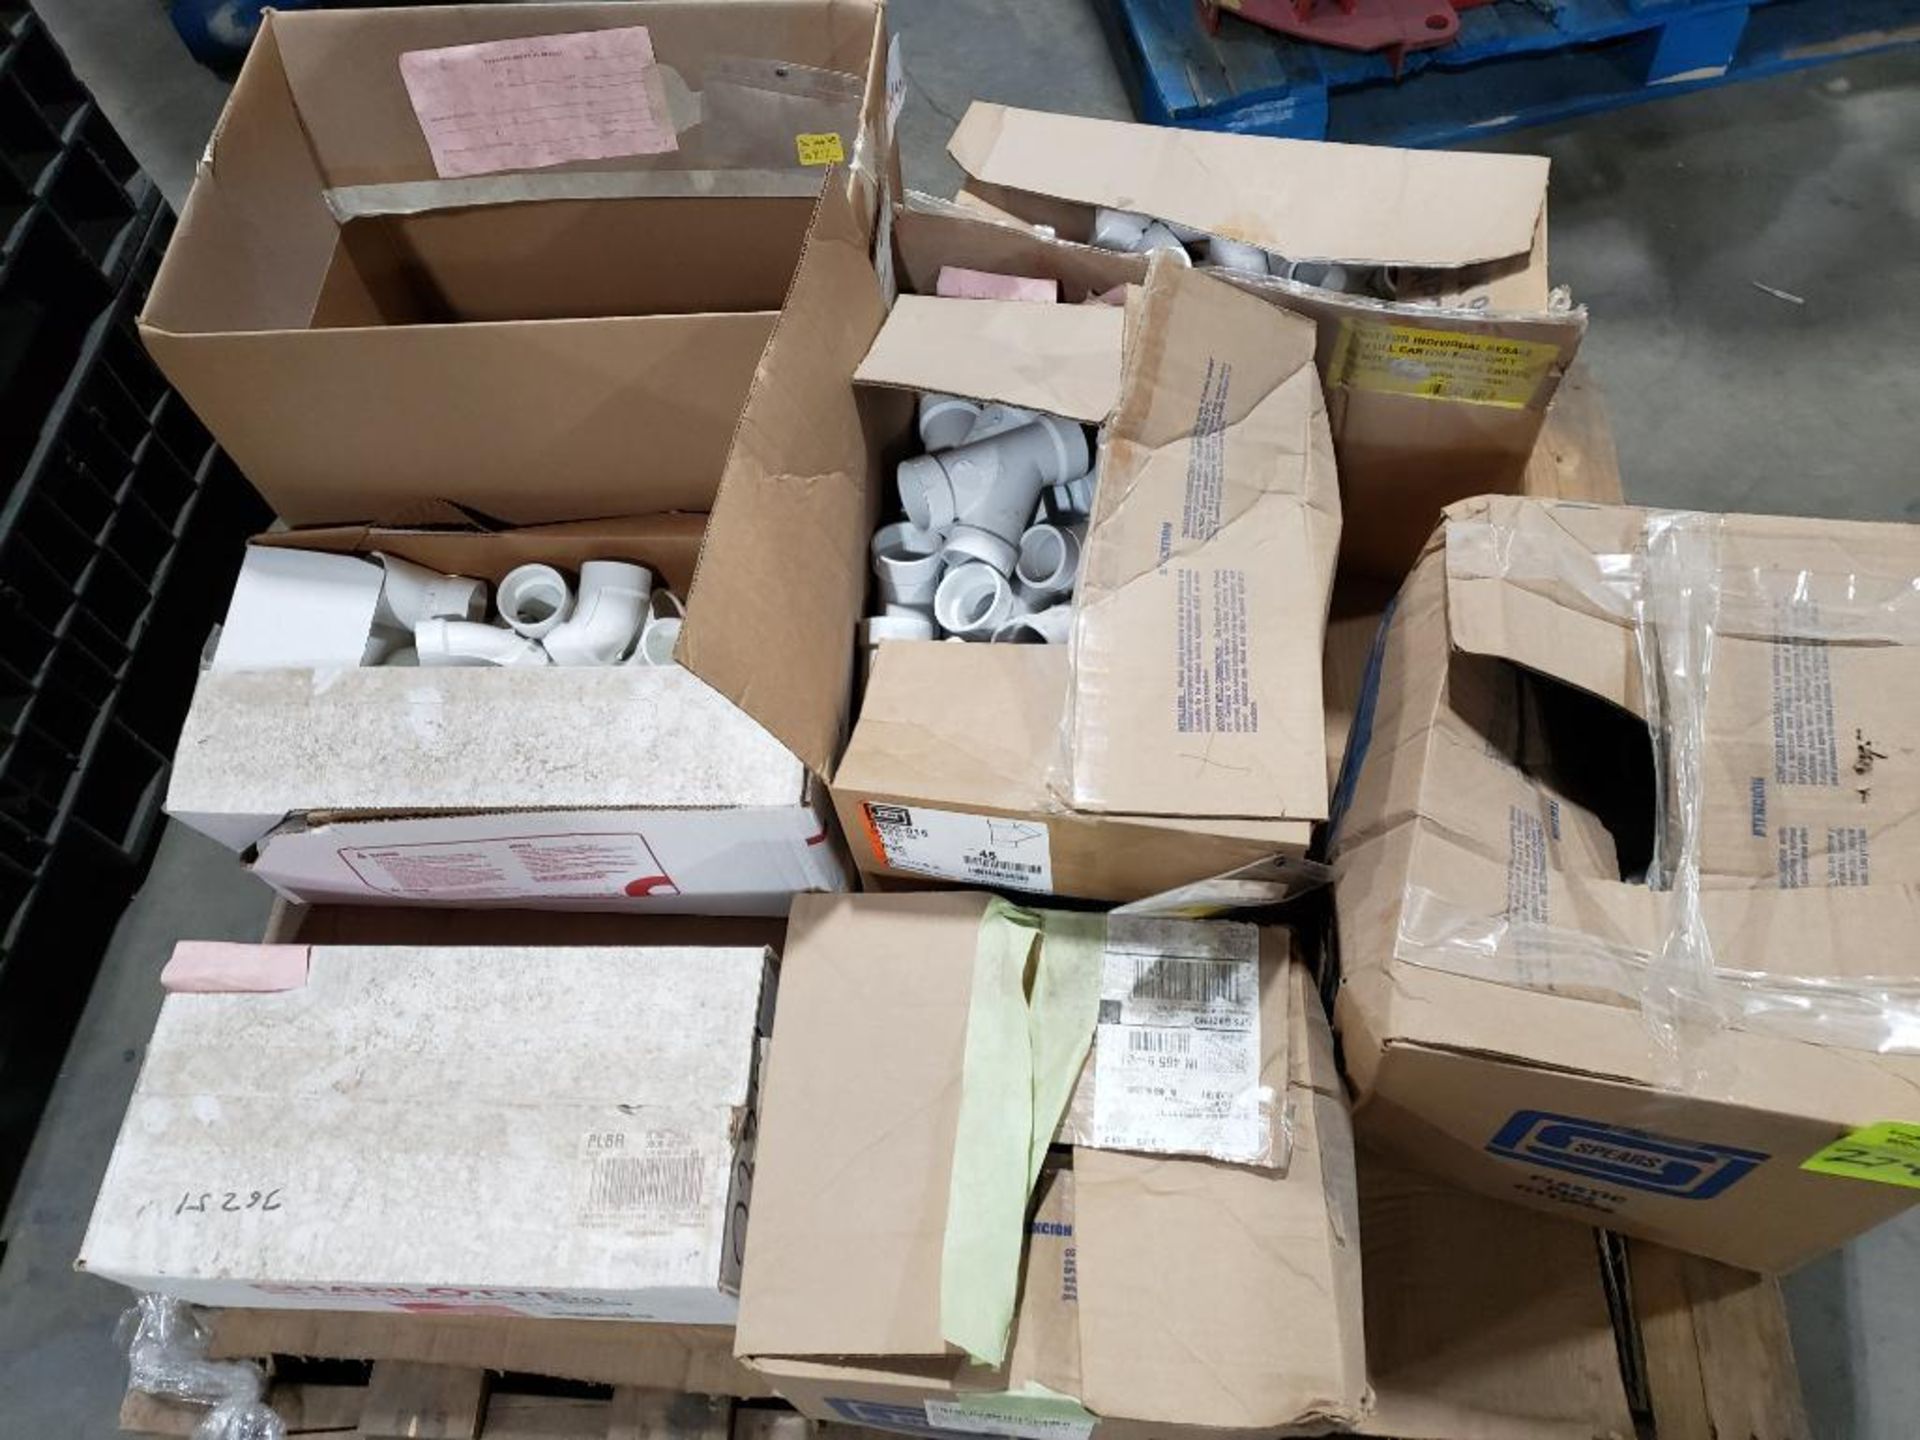 Pallet of assorted PVC fittings.